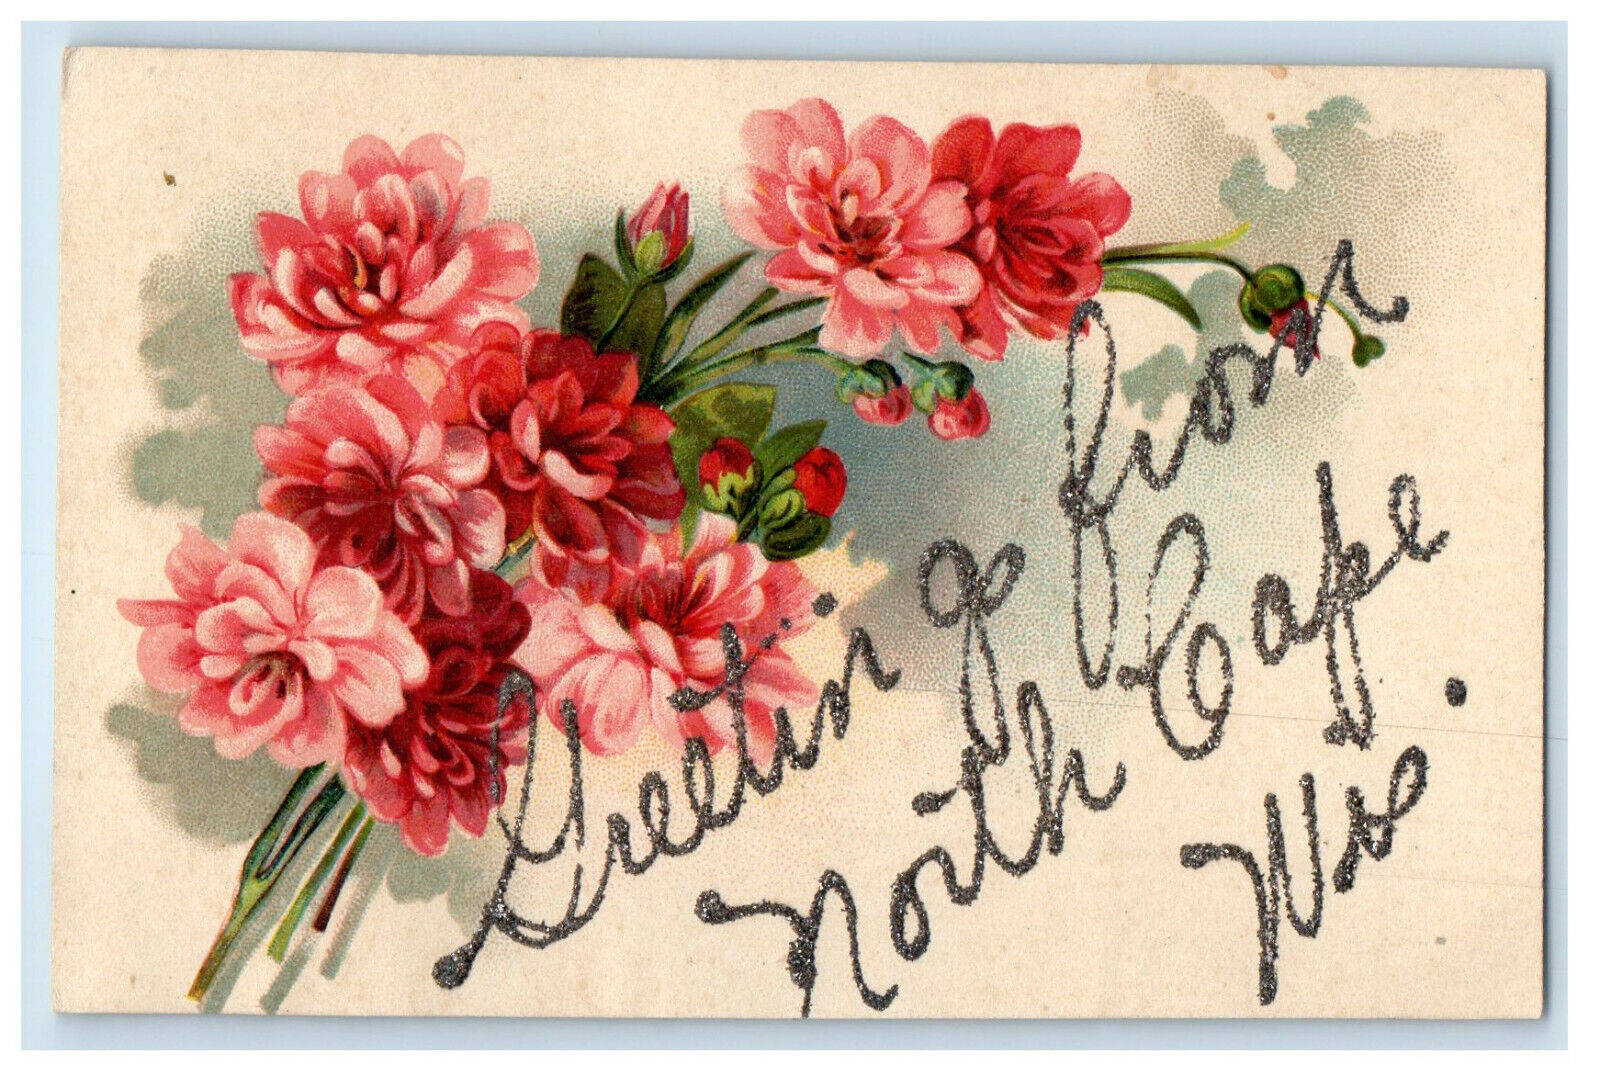 c1910 Pink Flowers, Greeting from North Cape Wisconsin WI Antique Postcard